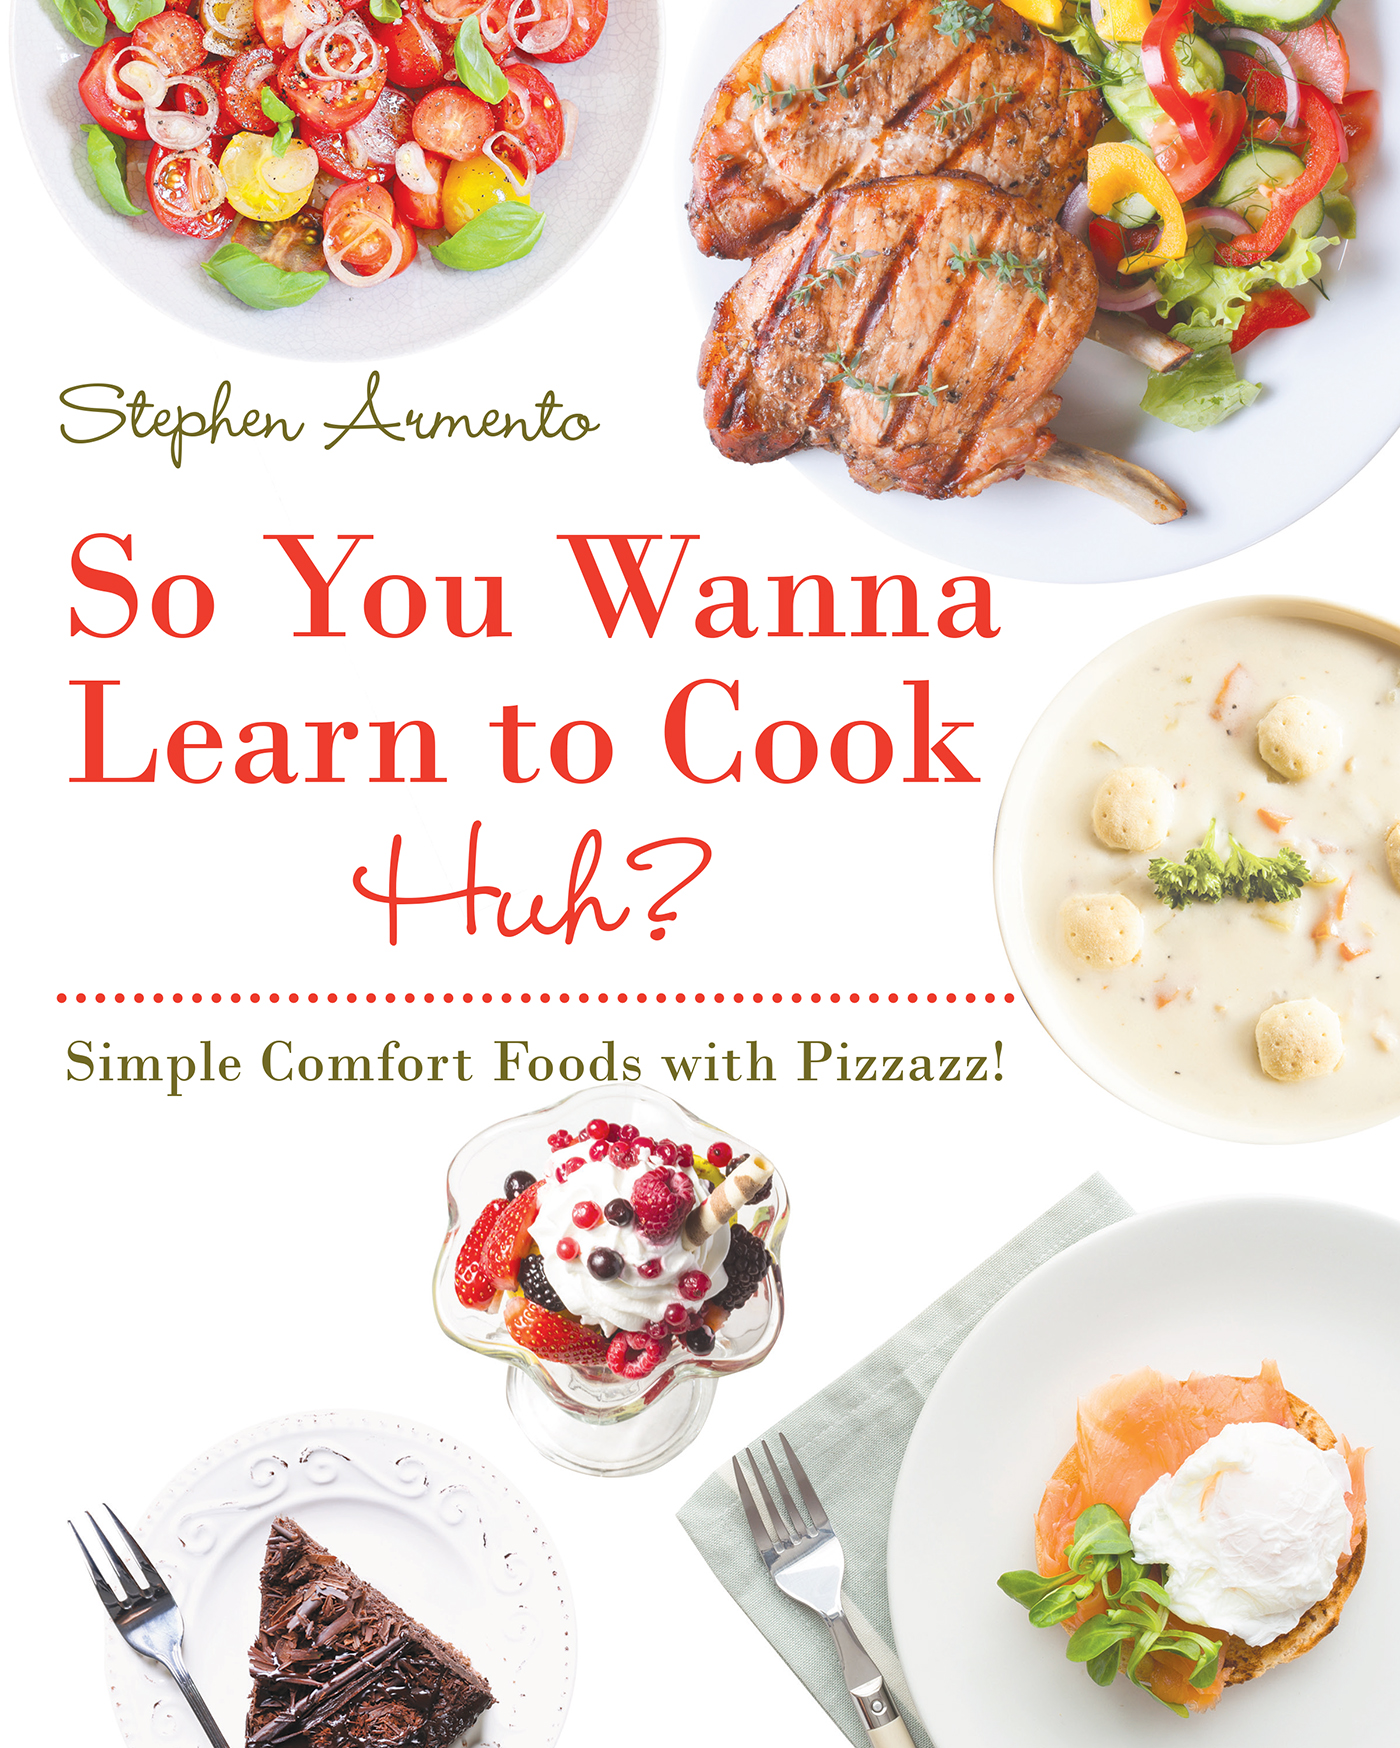 So You Wanna Learn to Cook Huh? Cover Image